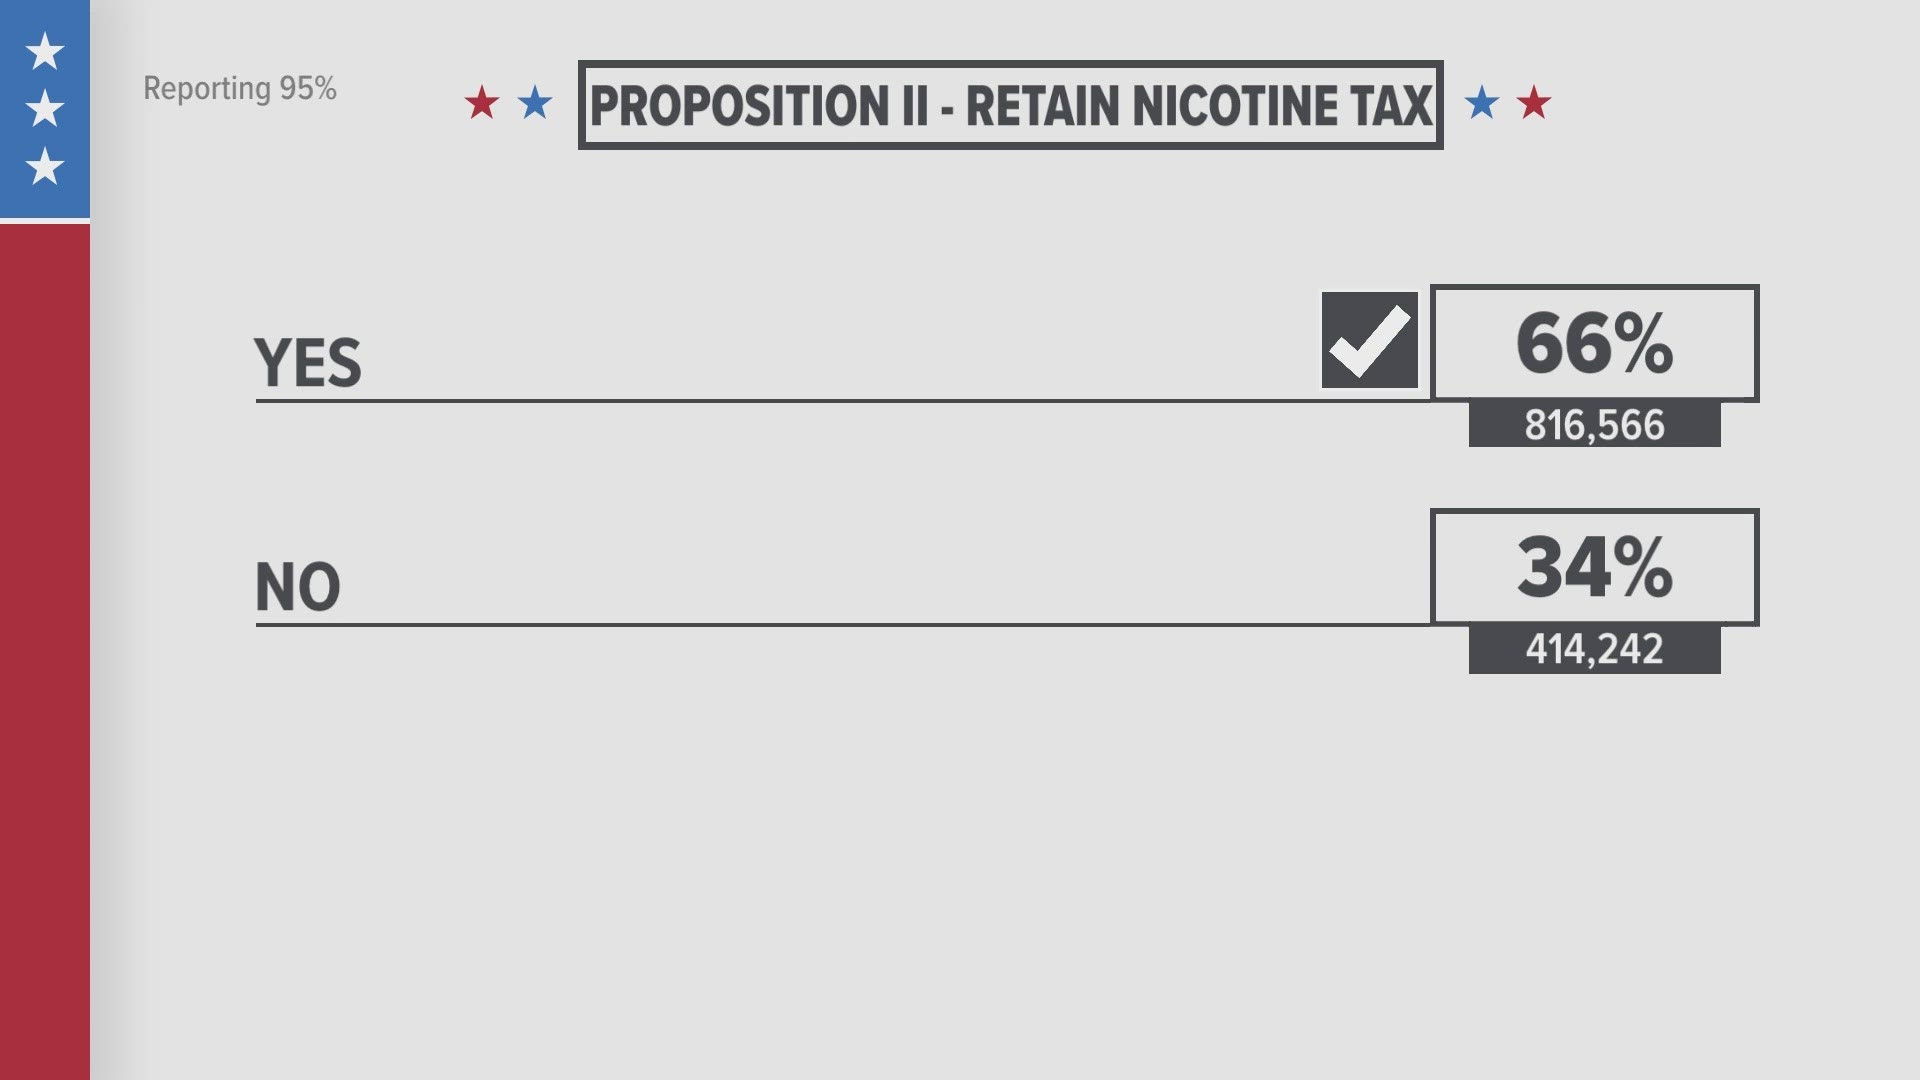 Coloradans voted to approve Proposition II, which allows the state to keep millions of dollars in extra nicotine taxes originally set aside for universal preschool.